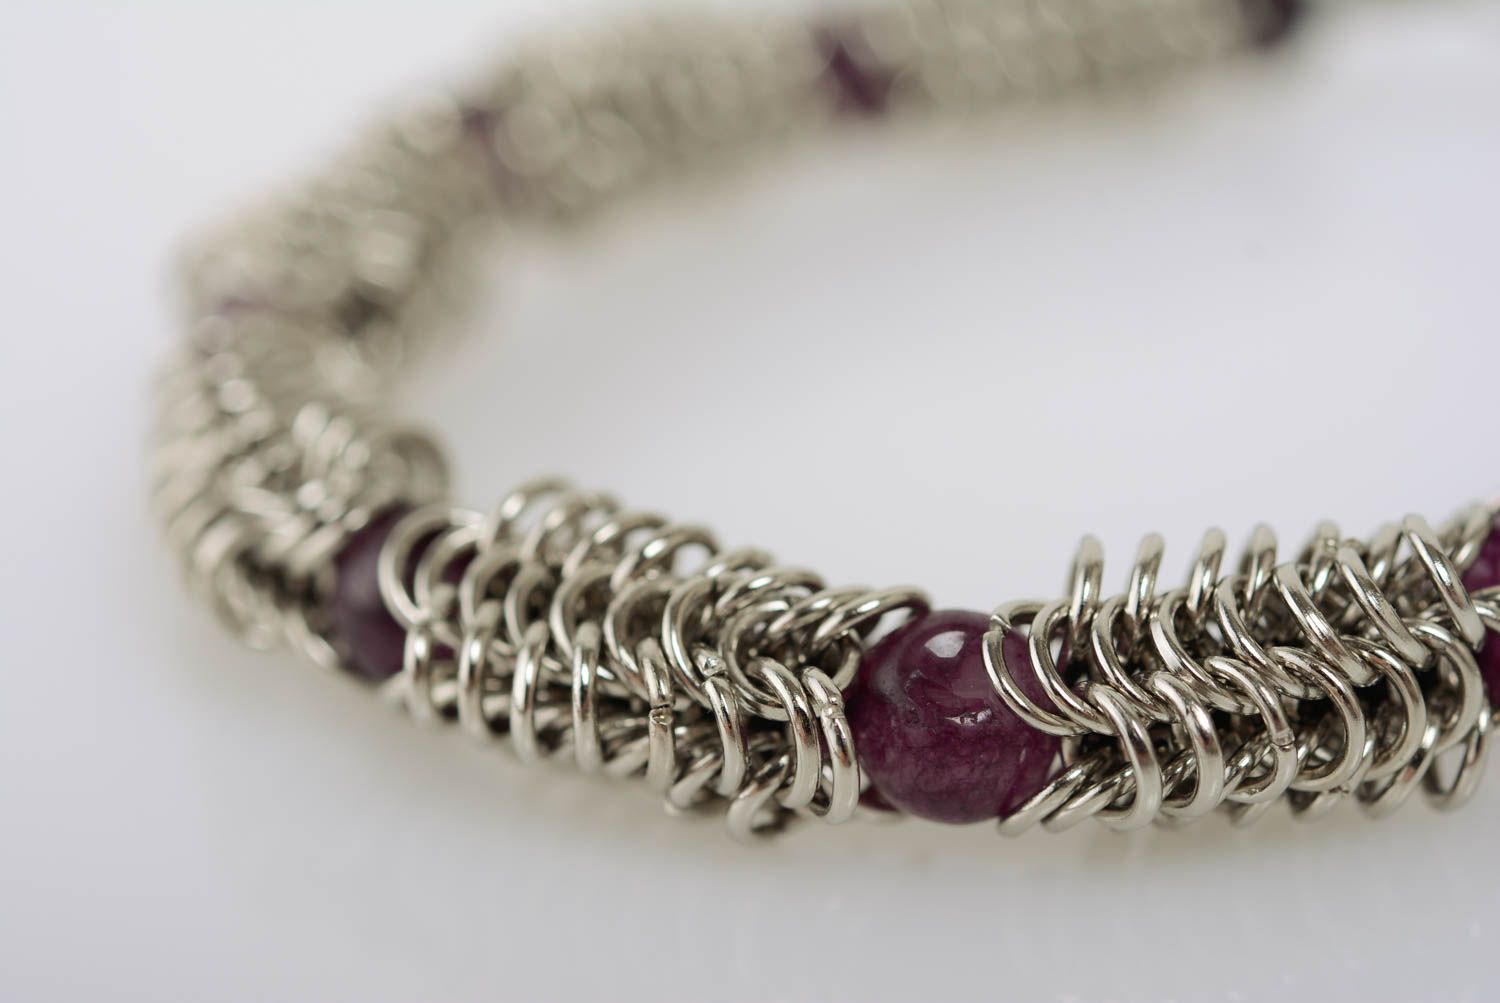 Handmade jewelry alloy bracelet chain mail weaving technique with amethyst photo 2